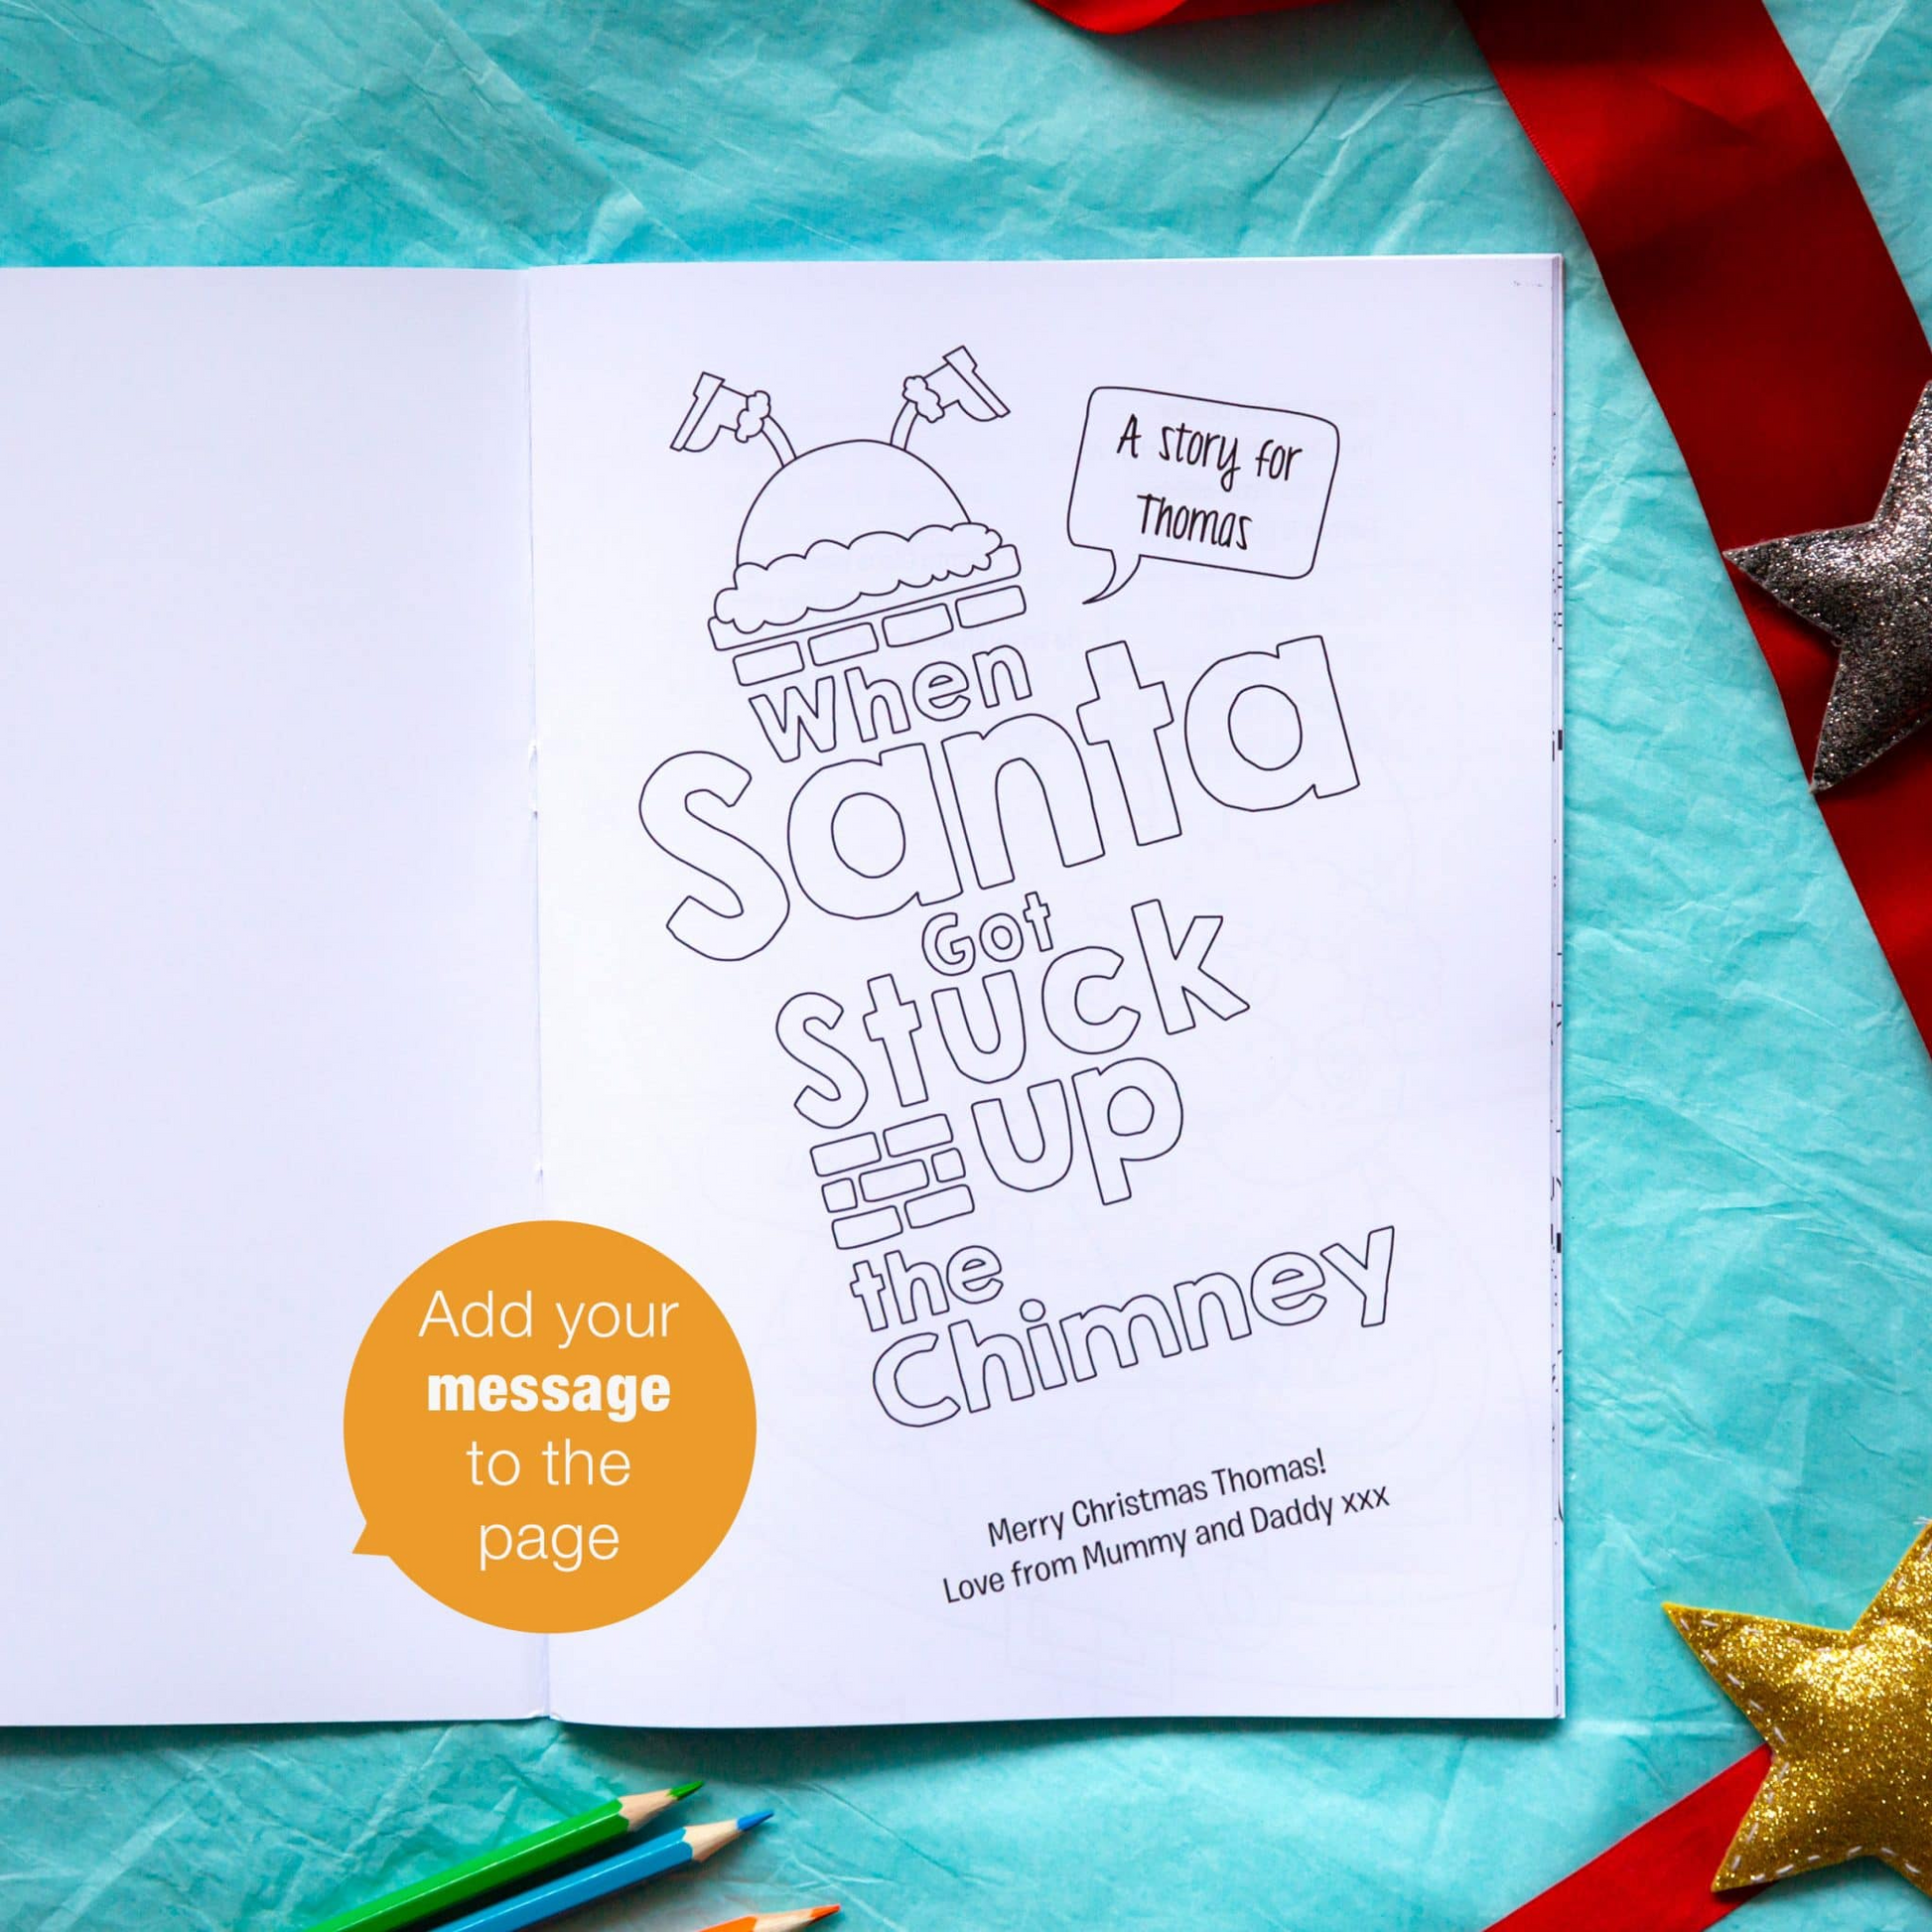 Personalised When Santa Got Stuck Up The Chimney Christmas Colouring Book